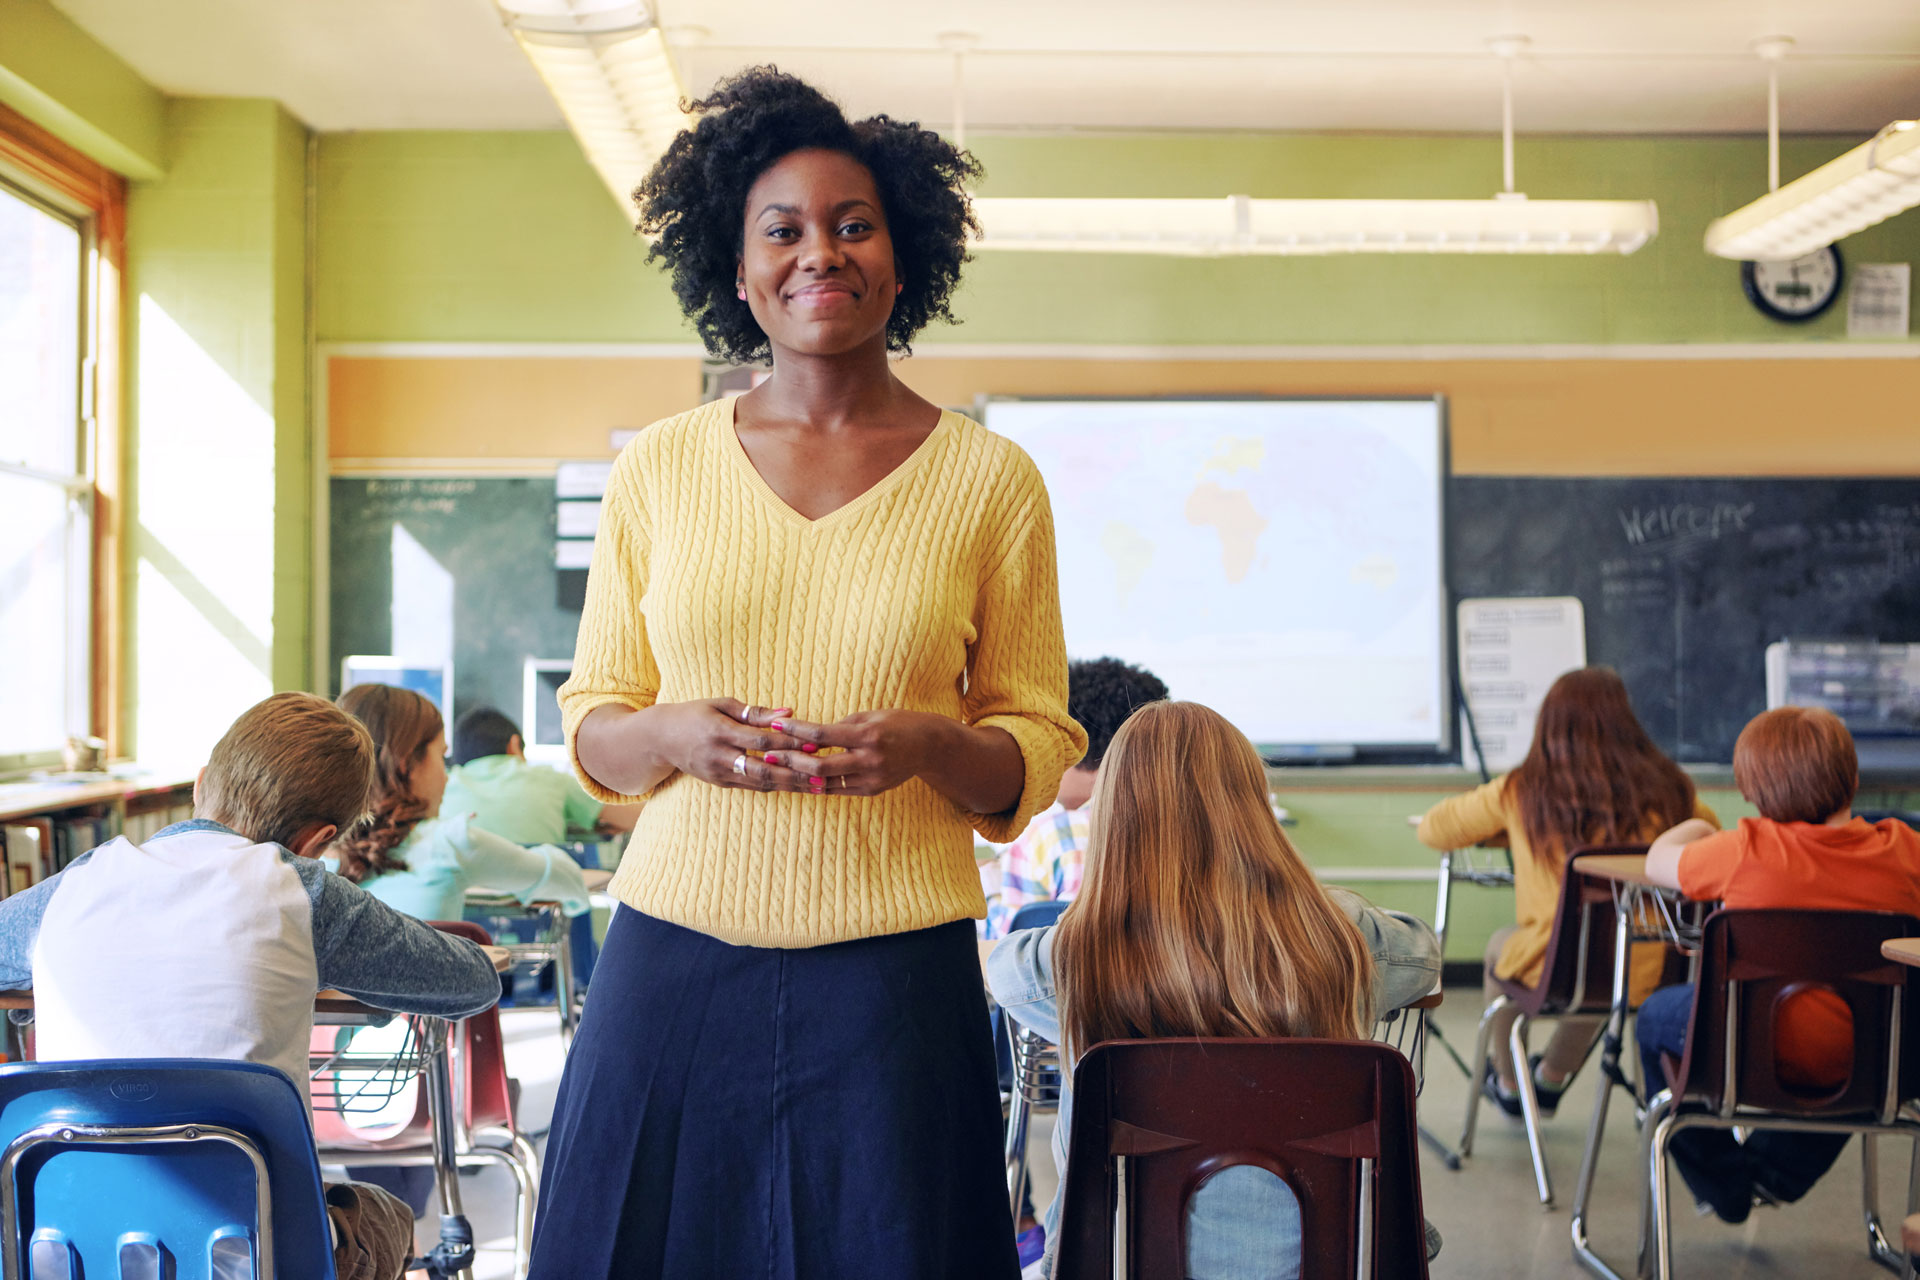 A black female teacher stands at the back of the classroom. A group of students are behind her.